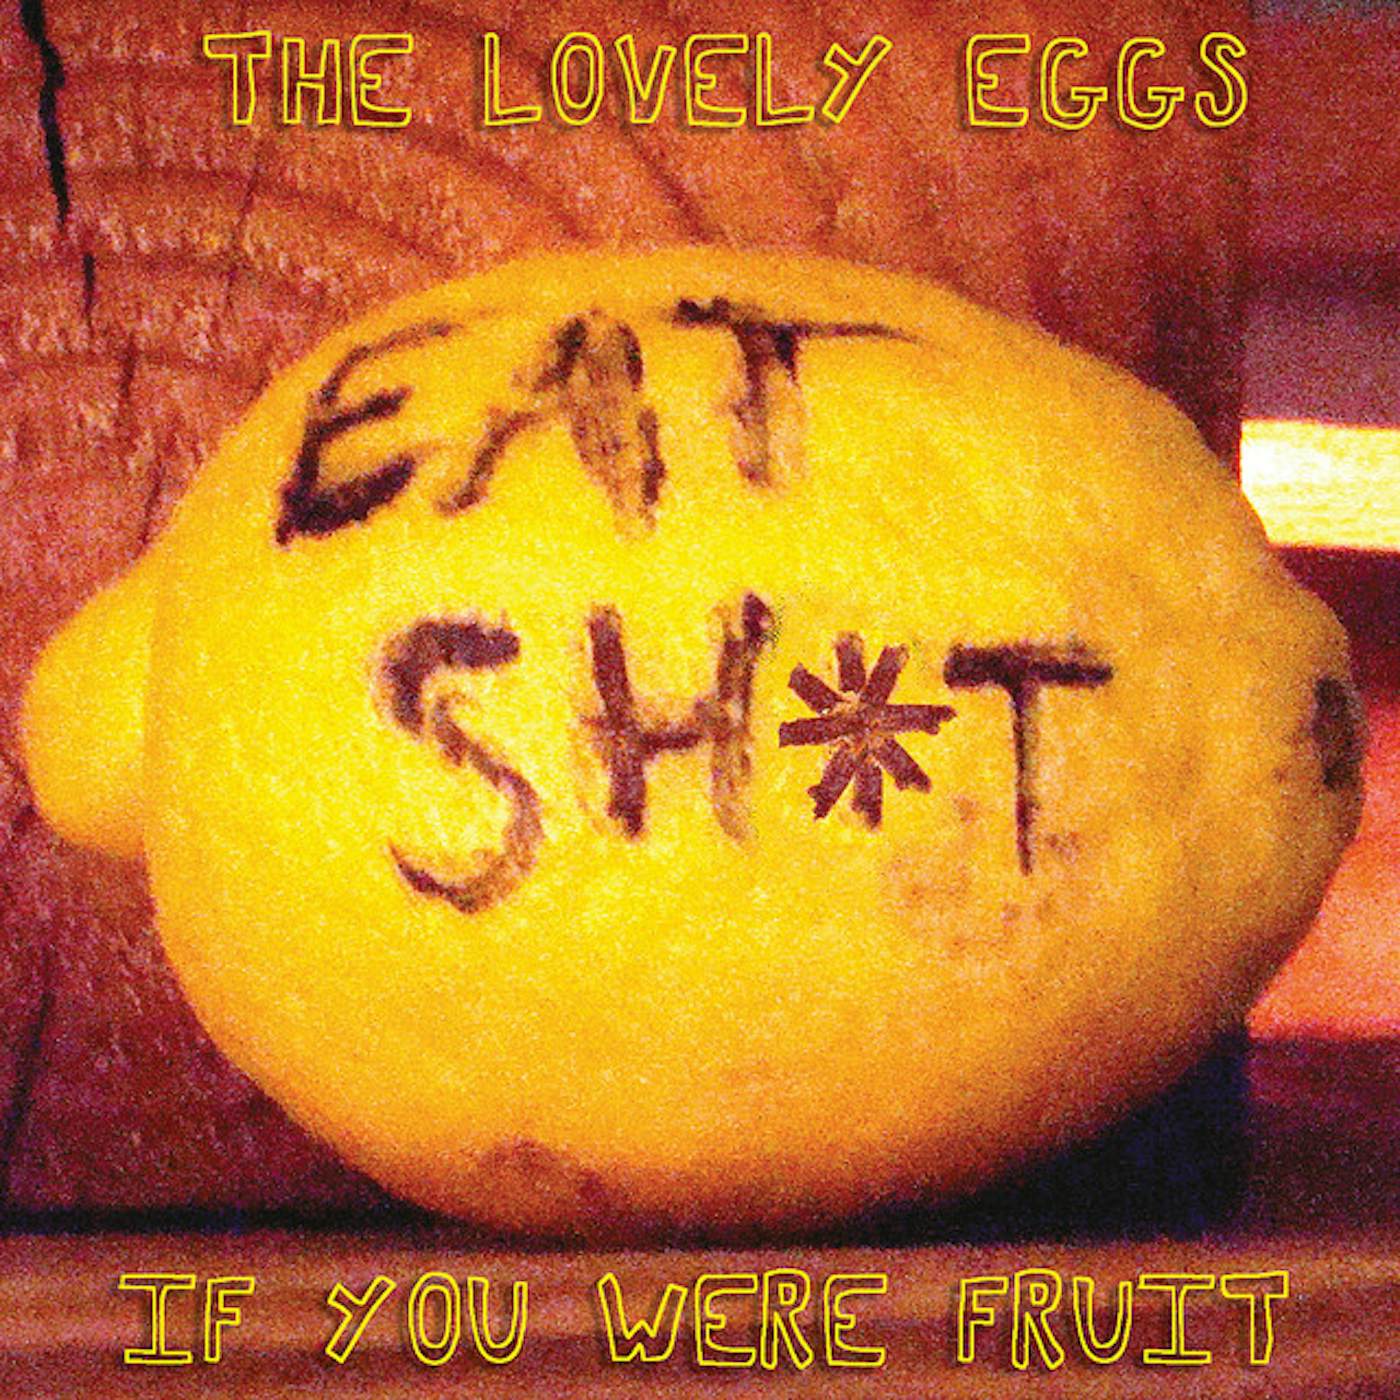 The Lovely Eggs If You Were Fruit Vinyl Record